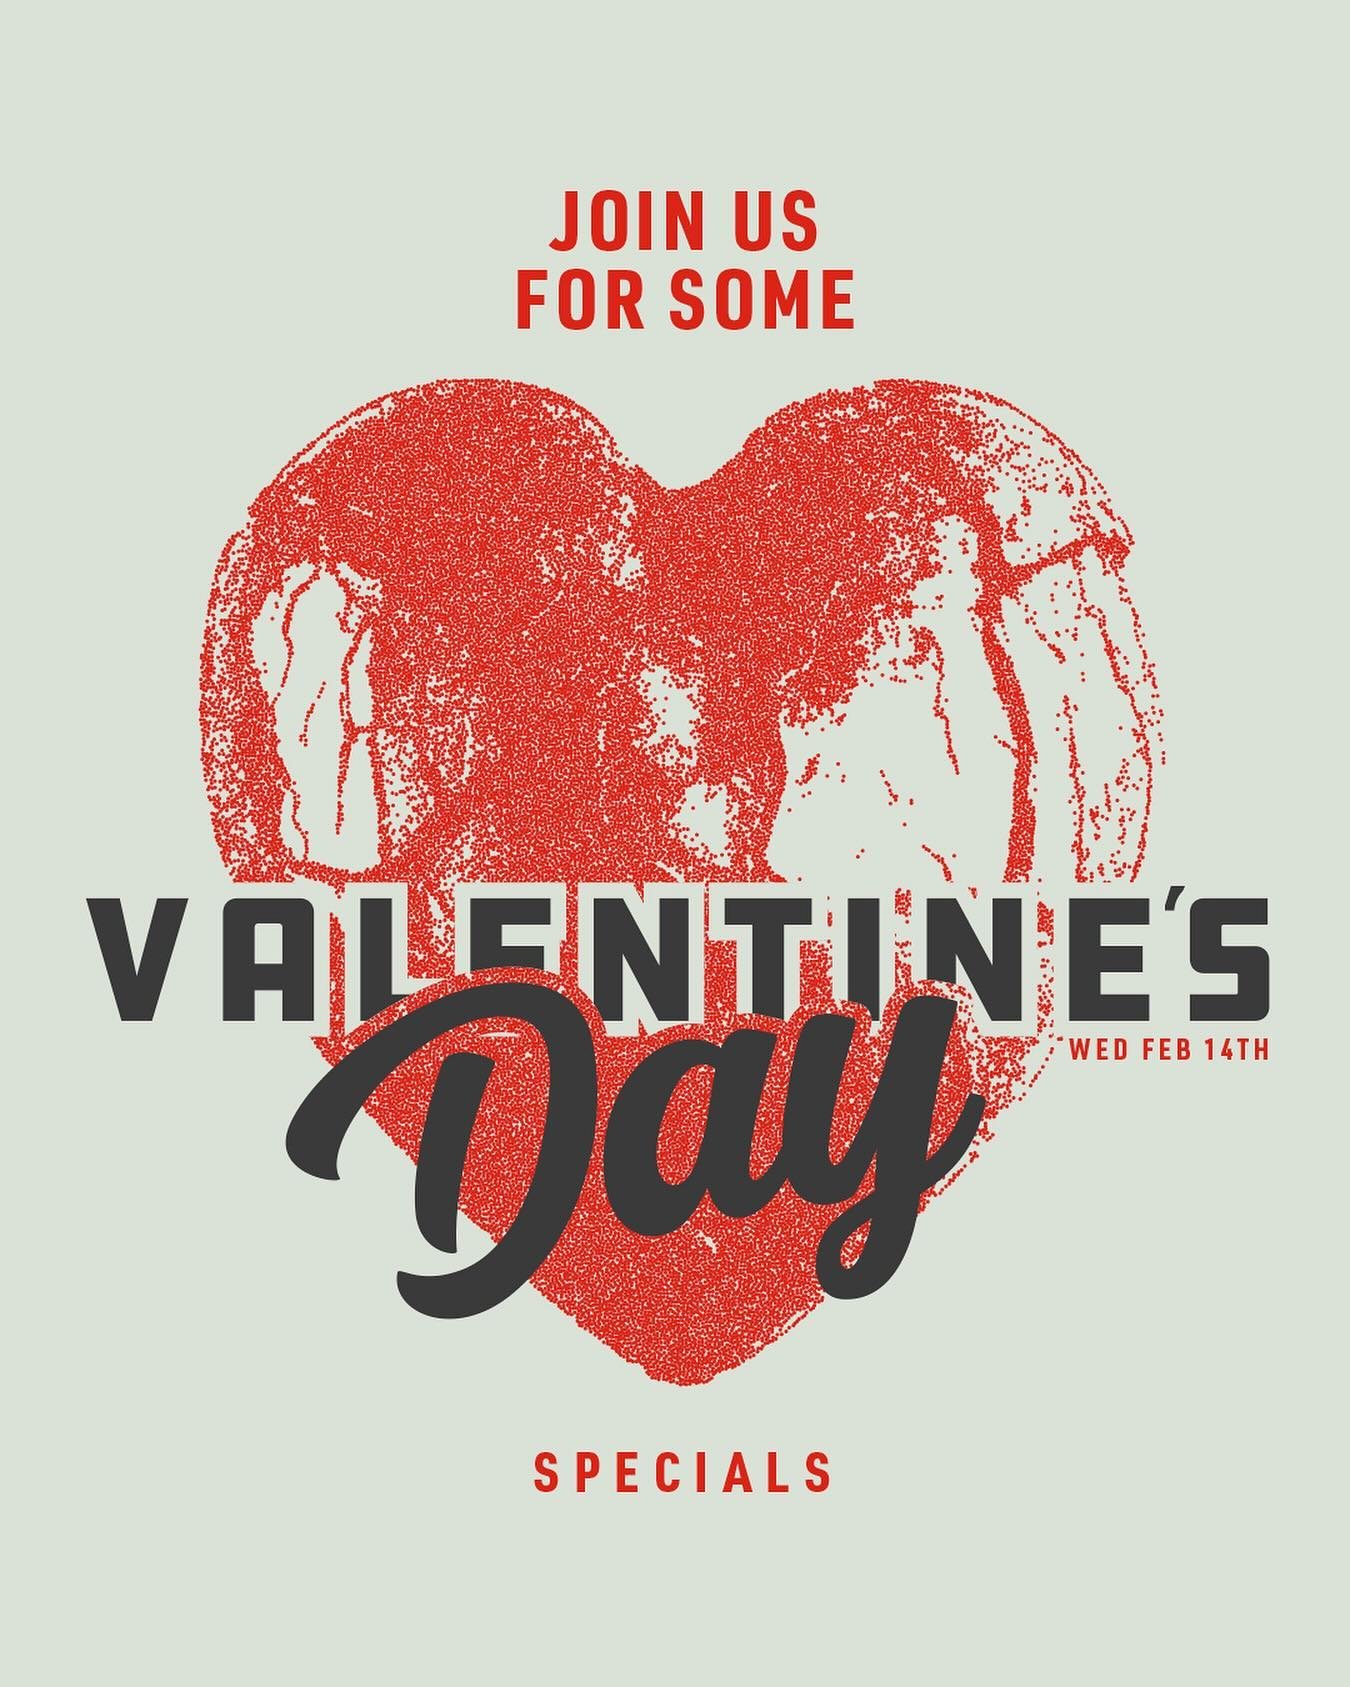 We will have a couple specials for you and yours this Wed! 

Sheppard&rsquo;s pie 🥧 for $17

Or our amazing 

Prime Rib Dip for $19

#odearbar #odearbarportland #valentines #valentinesdayspecials #valentinespdx